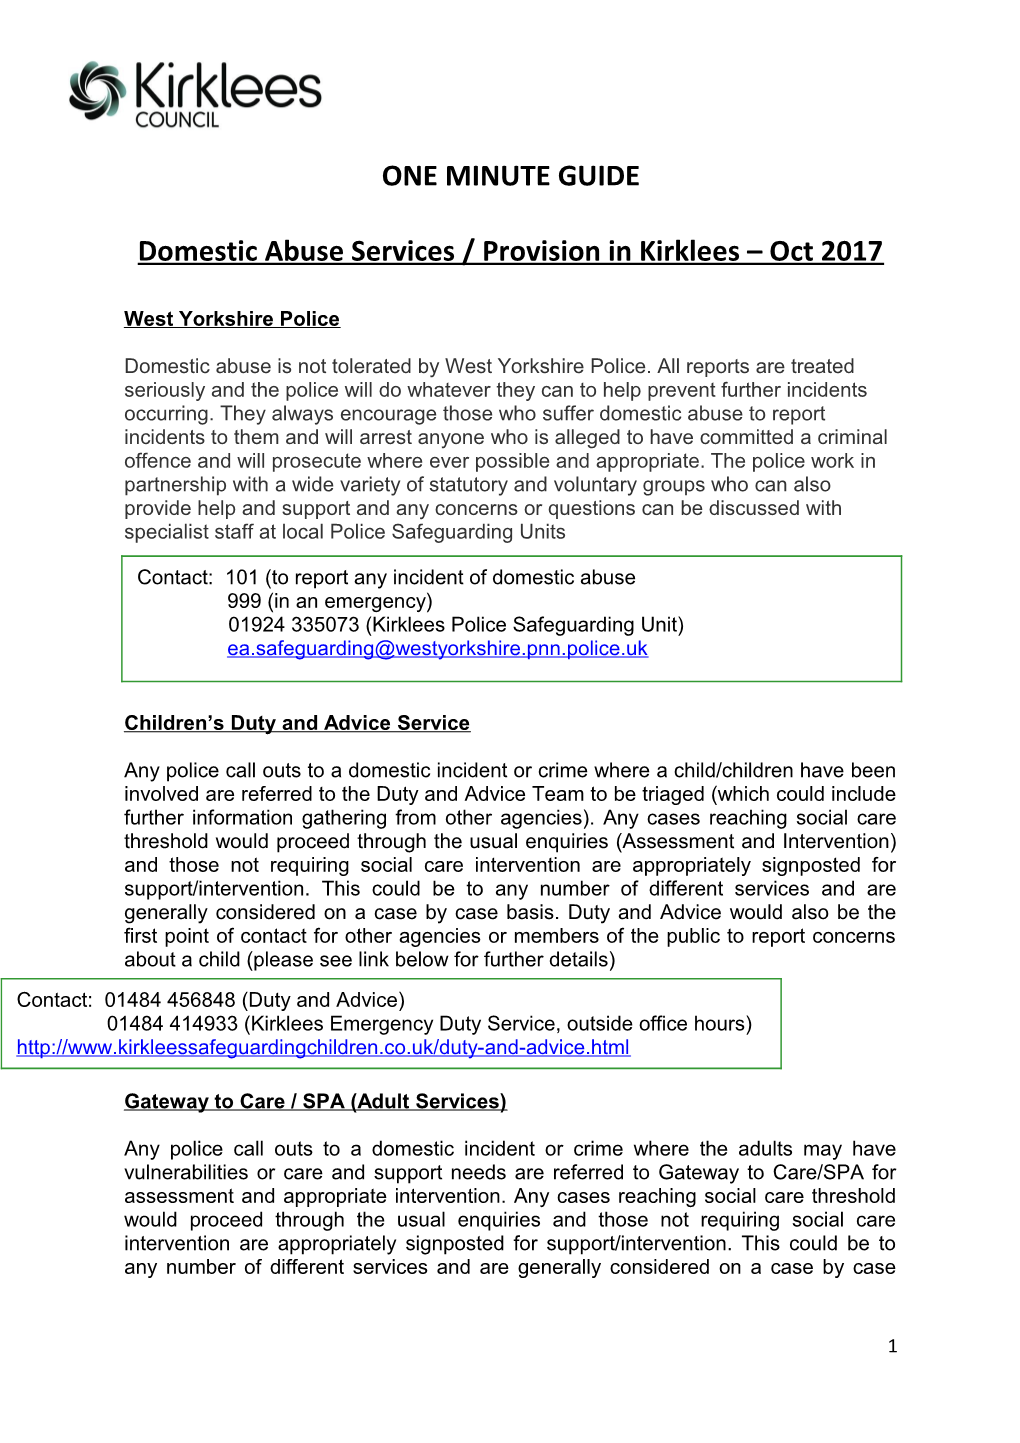 Domestic Abuse Services / Provision in Kirklees Oct 2017